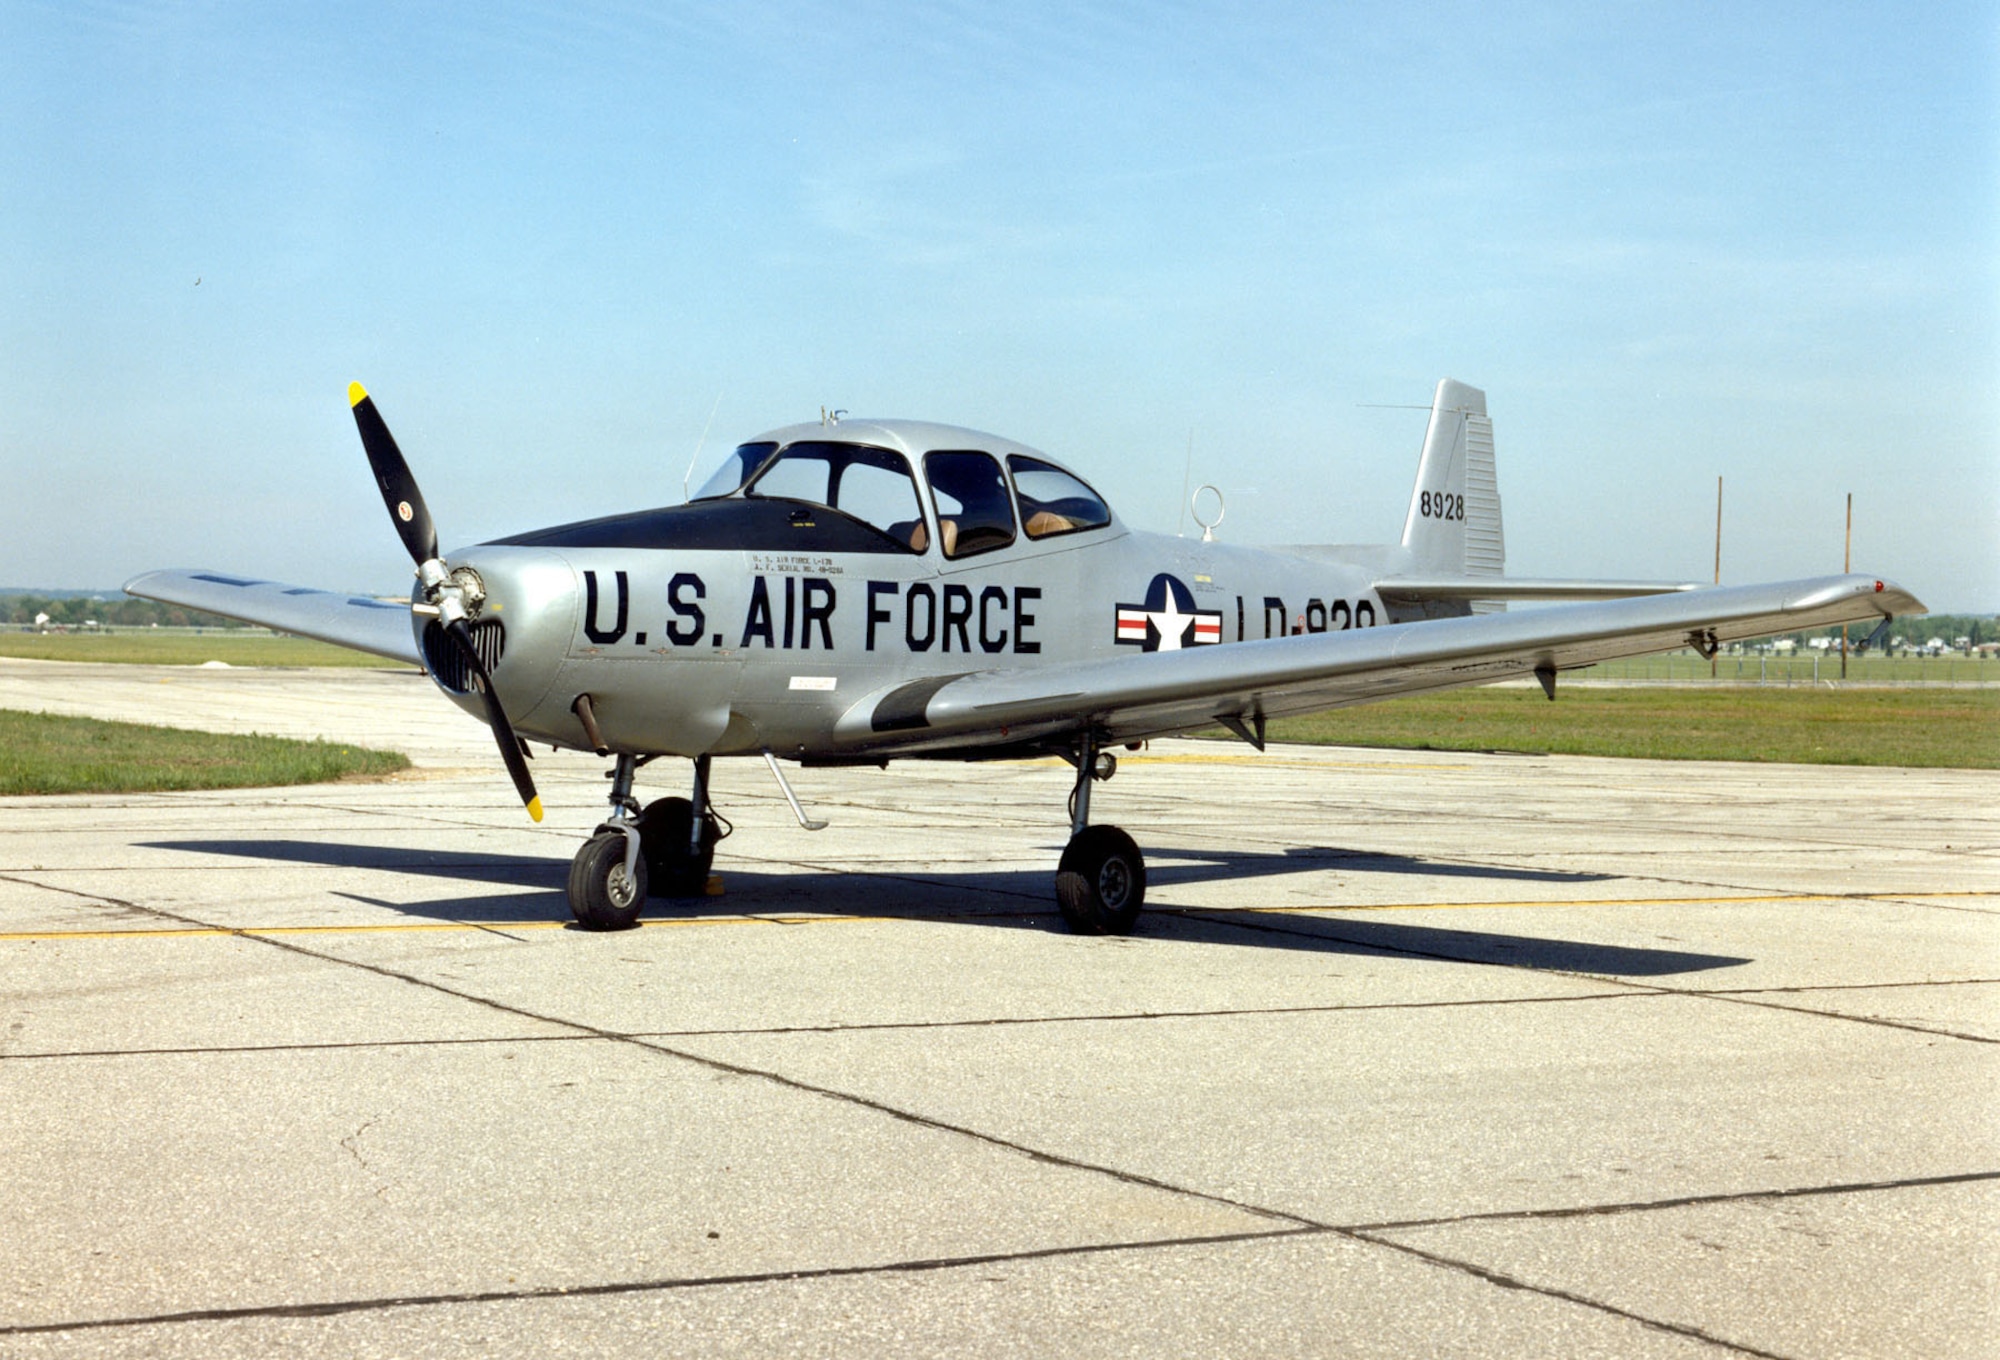 DAYTON, Ohio -- North American L-17A Navion at the National Museum of the United States Air Force. (U.S. Air Force photo)